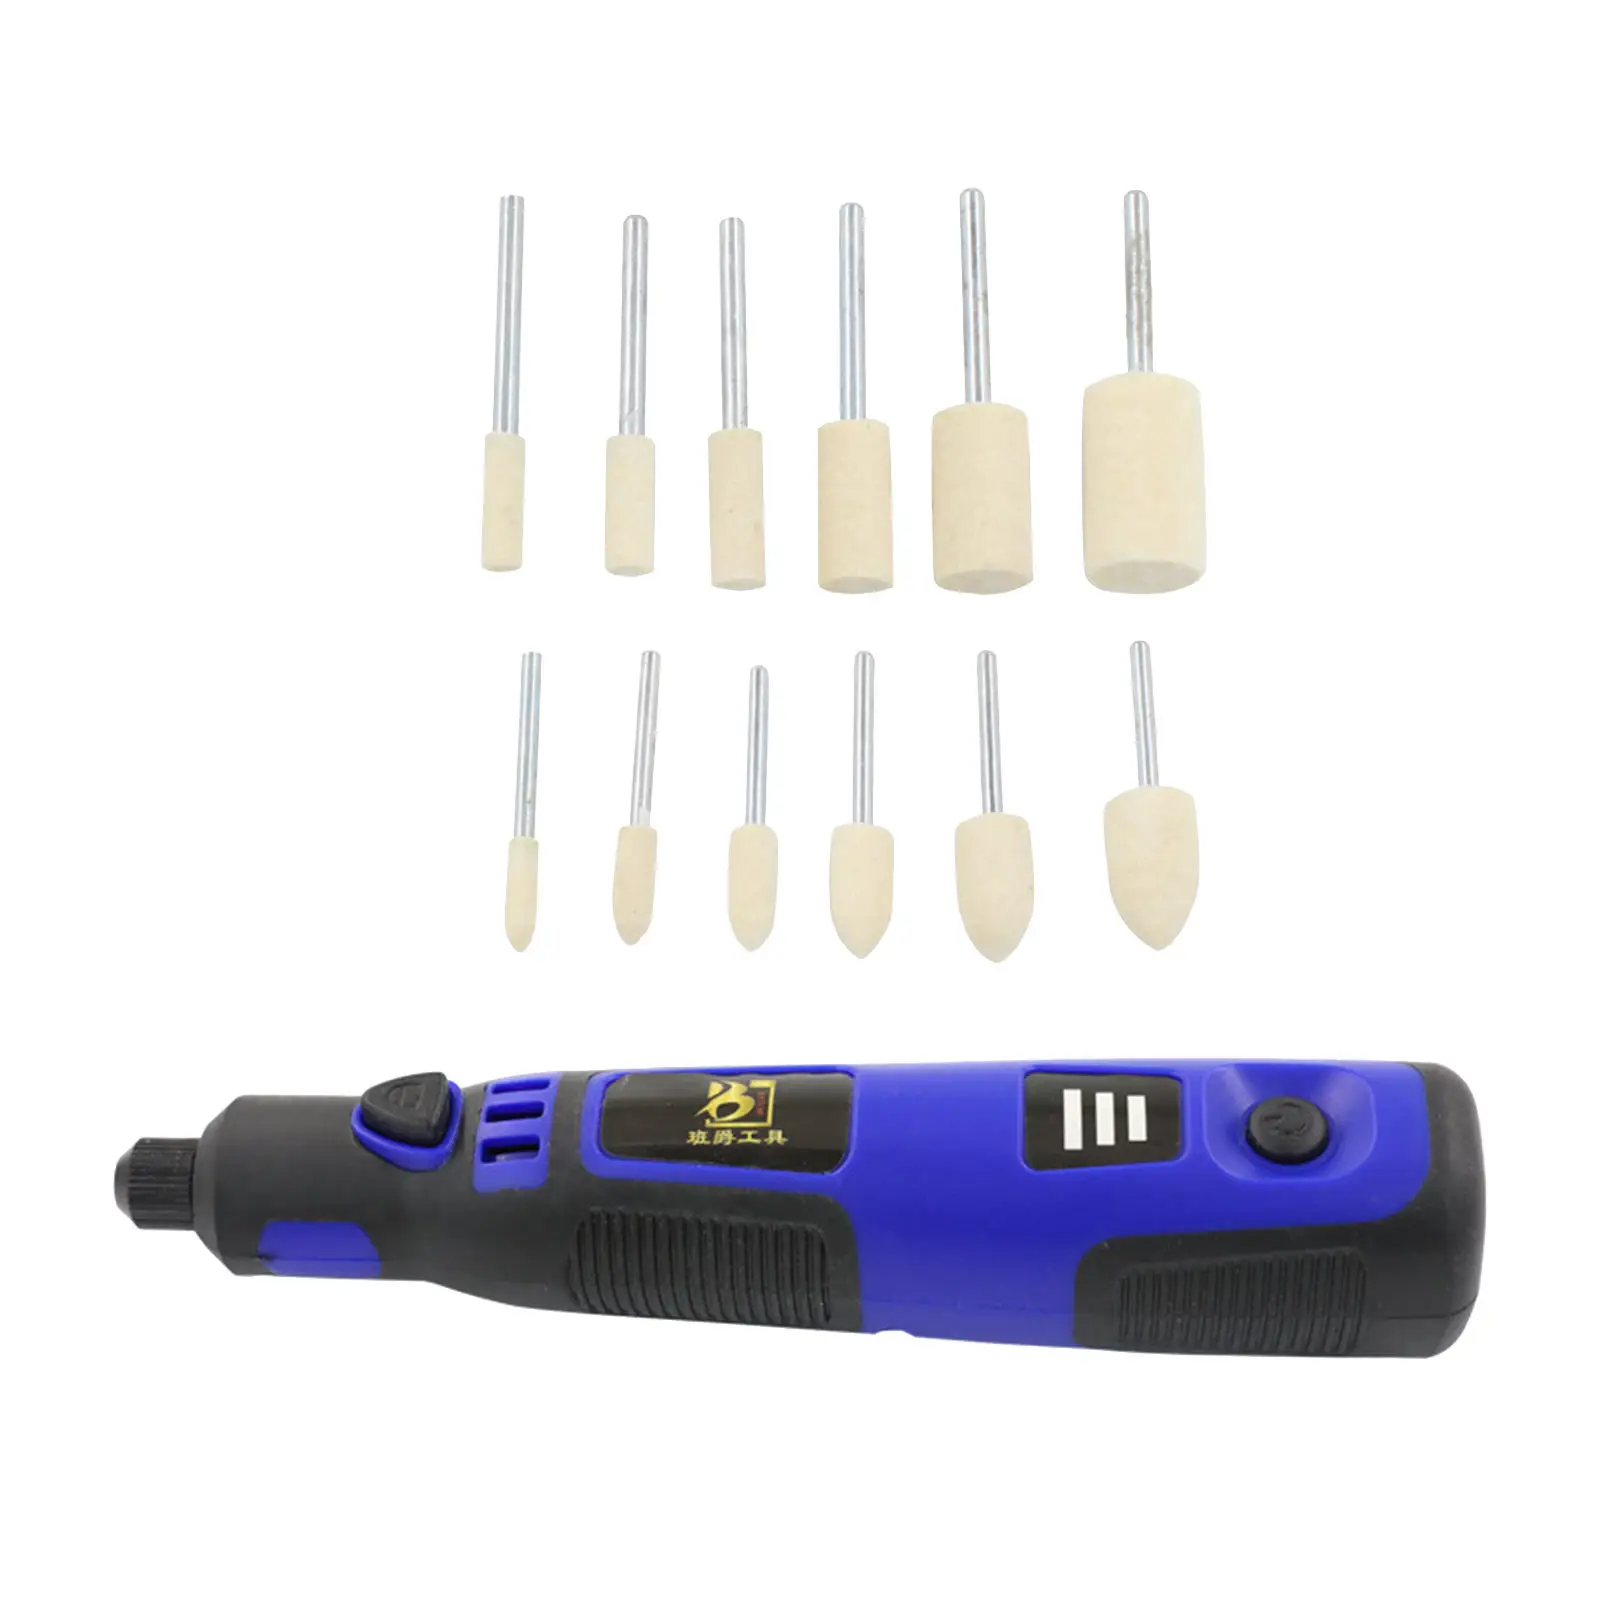 Electric 3.6V Nail Drill Kit 3-Gear Speed 5000-15000rpm Manicure Pedicure Polishing Carving Shape Grinder Pen Crafts